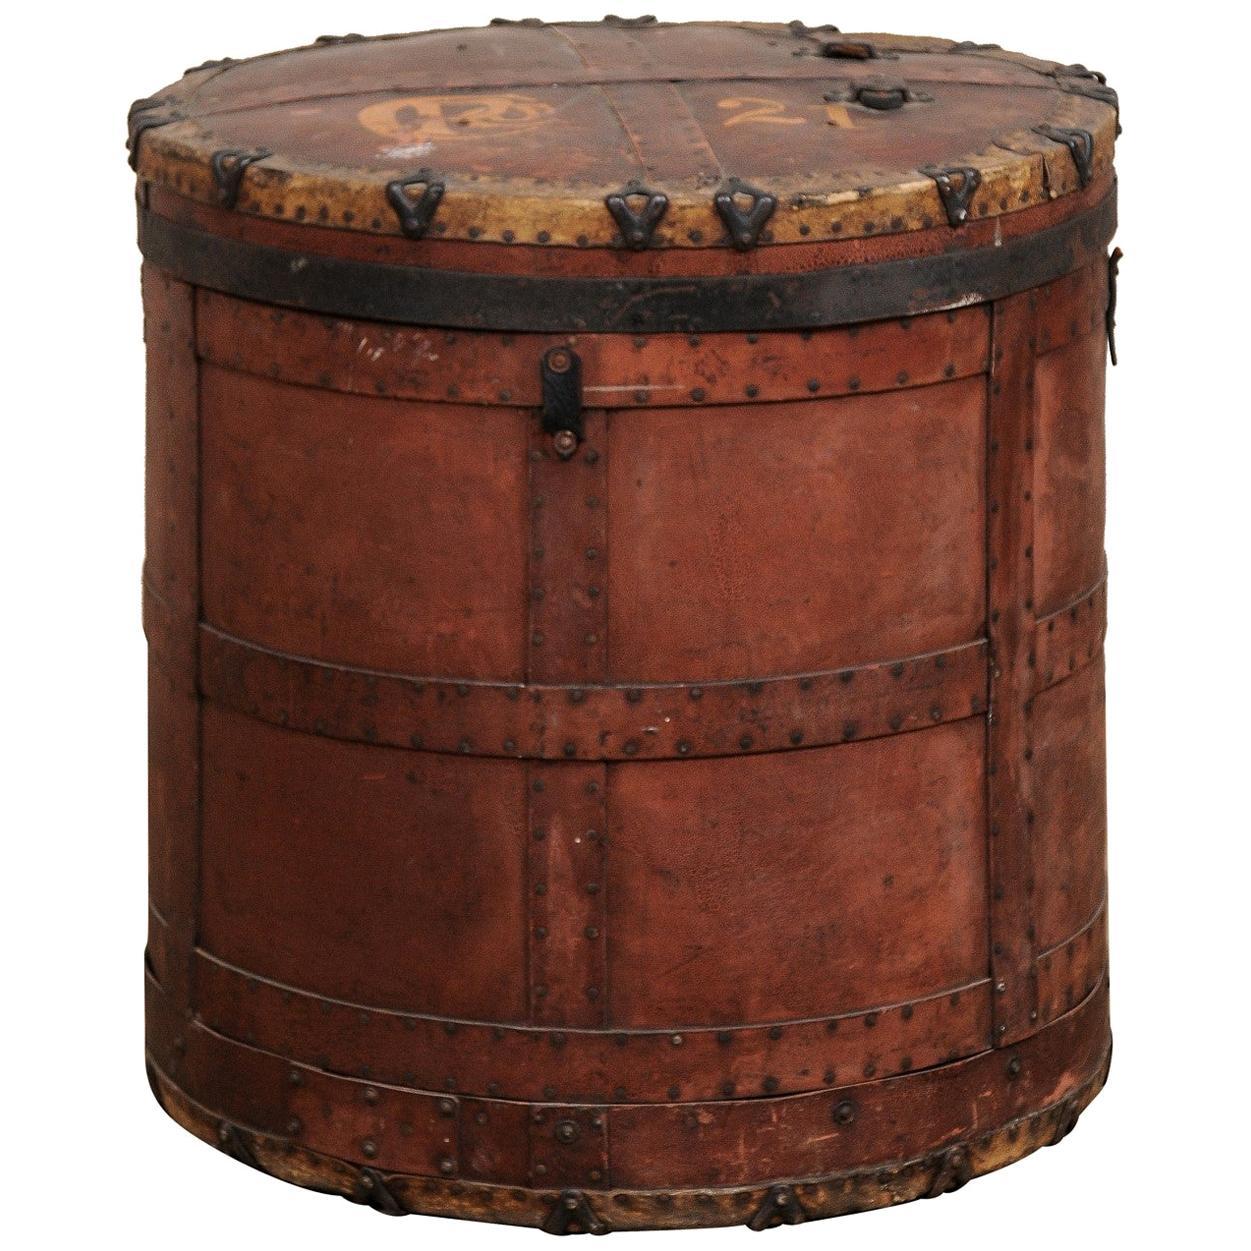 Antique European Drum-Shaped Storage Vessel with Removable Lid Top